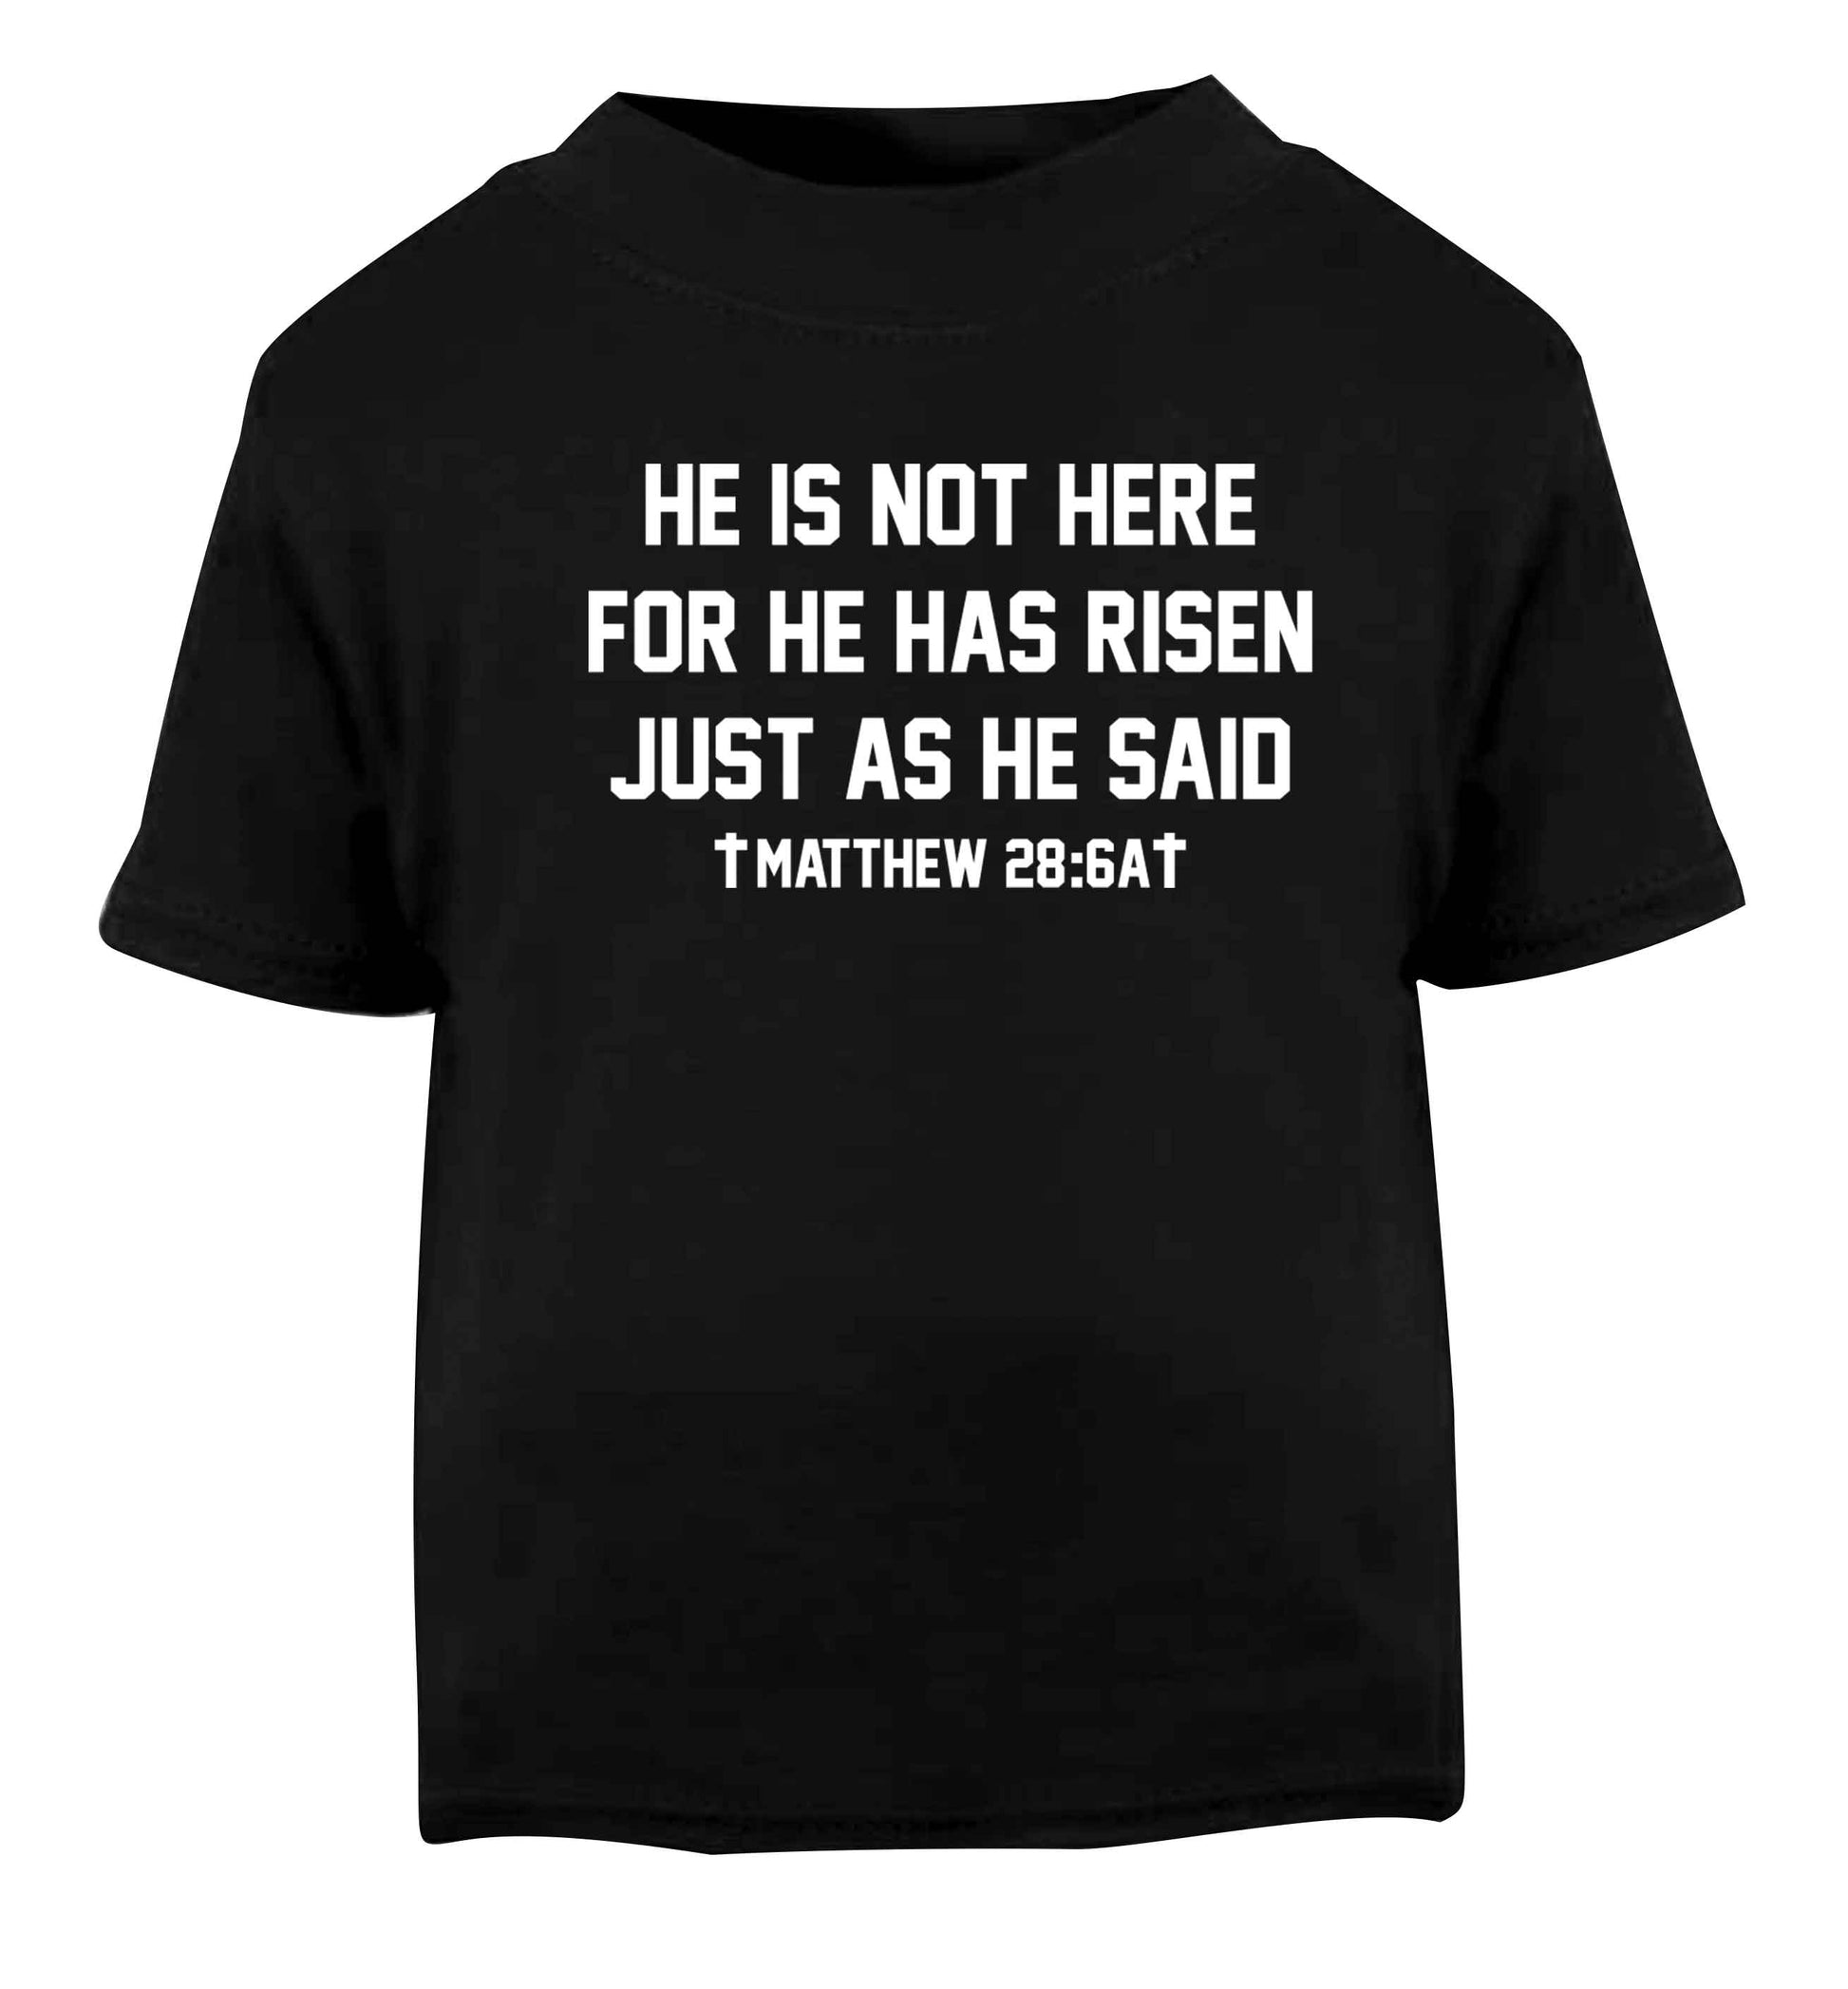 He is not here for he has risen just as he said matthew 28:6A Black baby toddler Tshirt 2 years